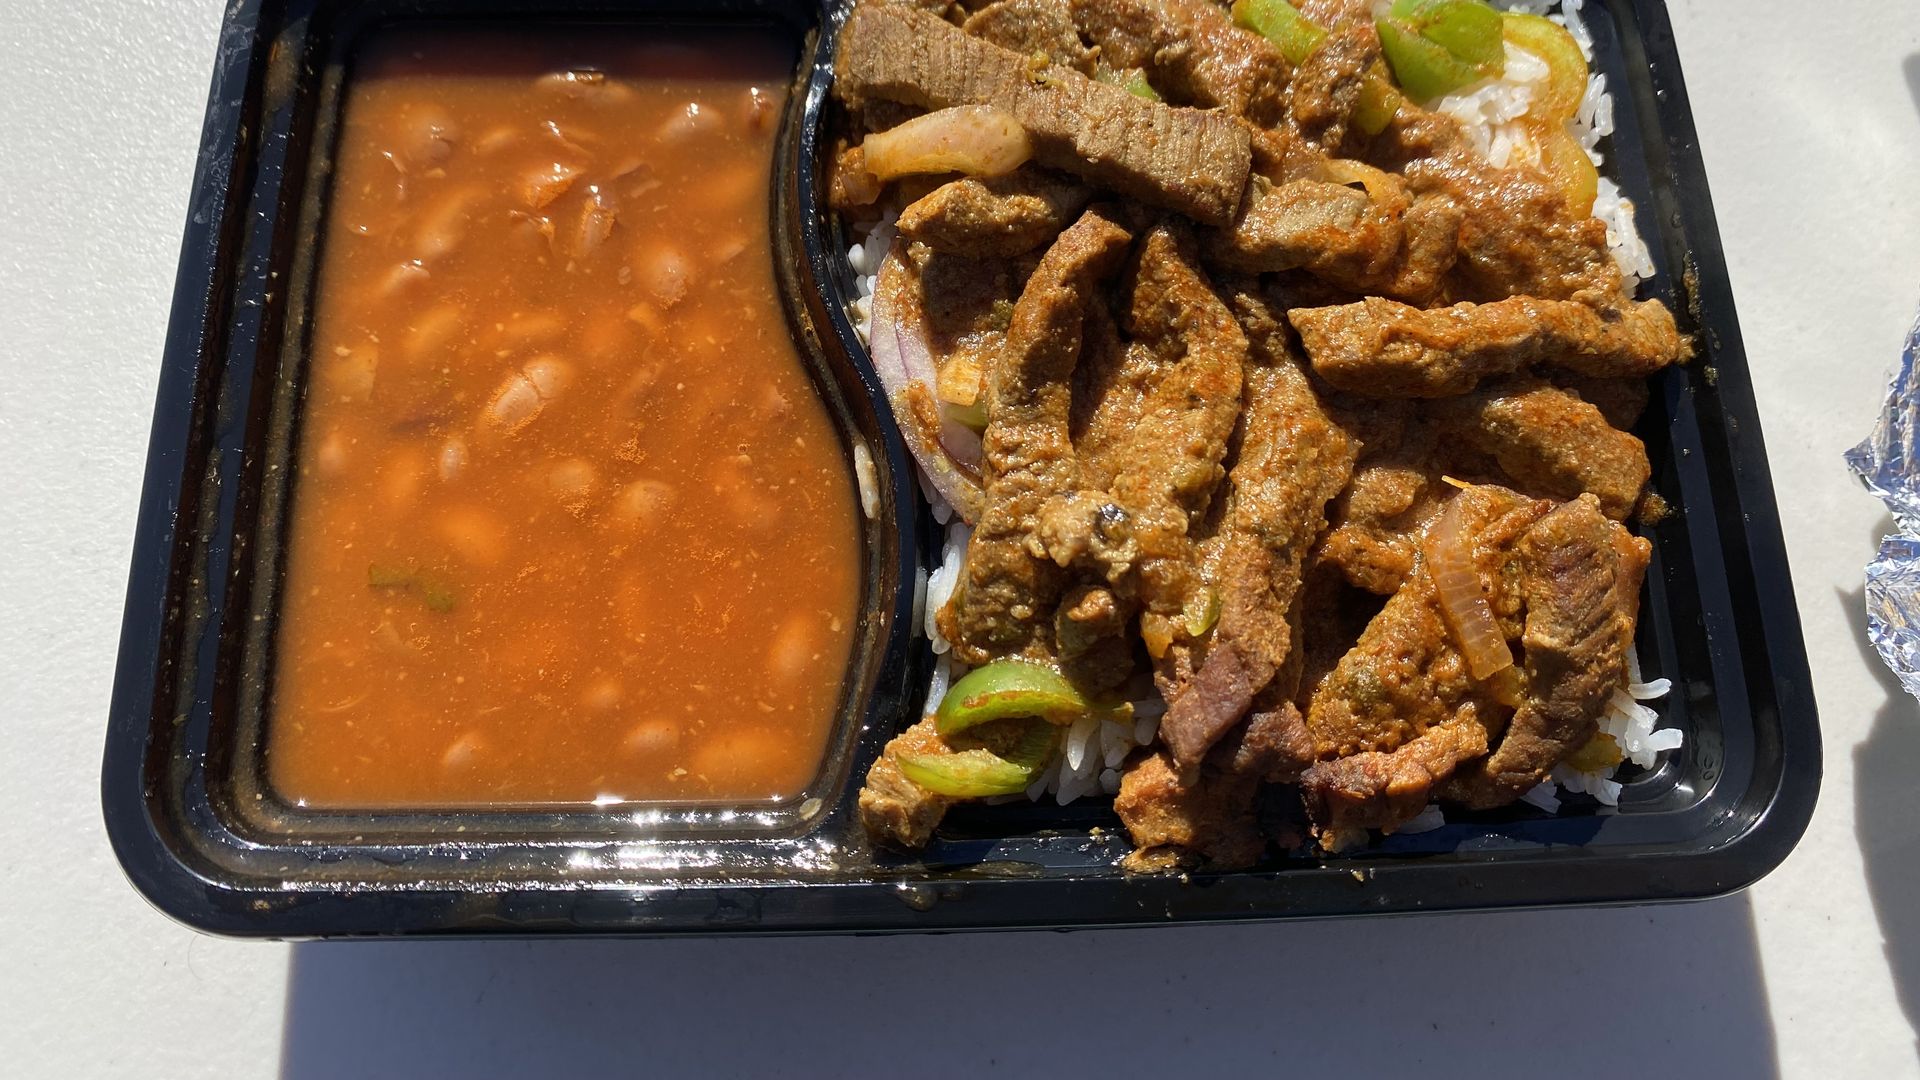 A compartmentalized plastic container with beef strips over rice on the right side and pinto beans on the left.